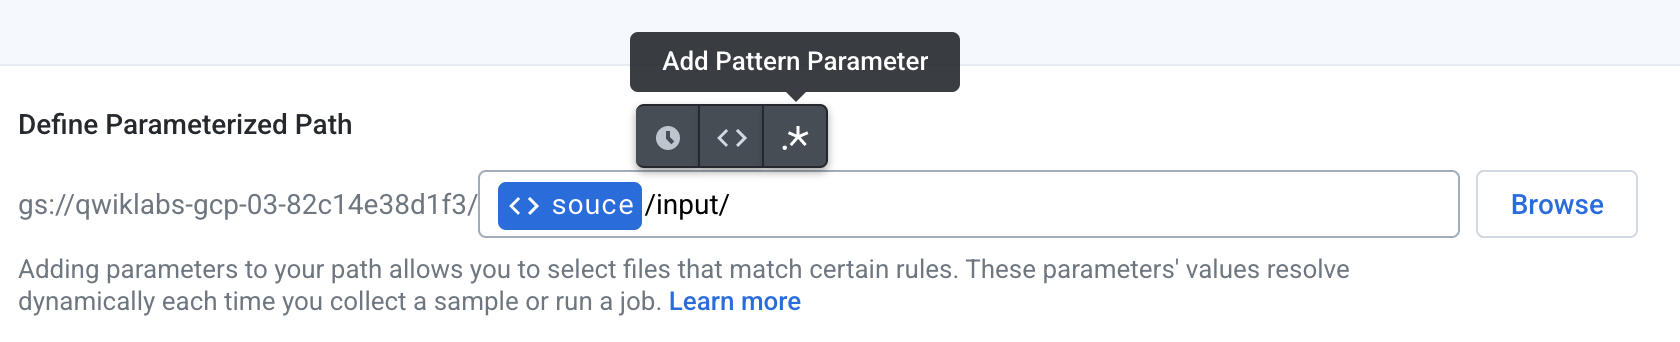 Add Pattern Parameter icon highlighted